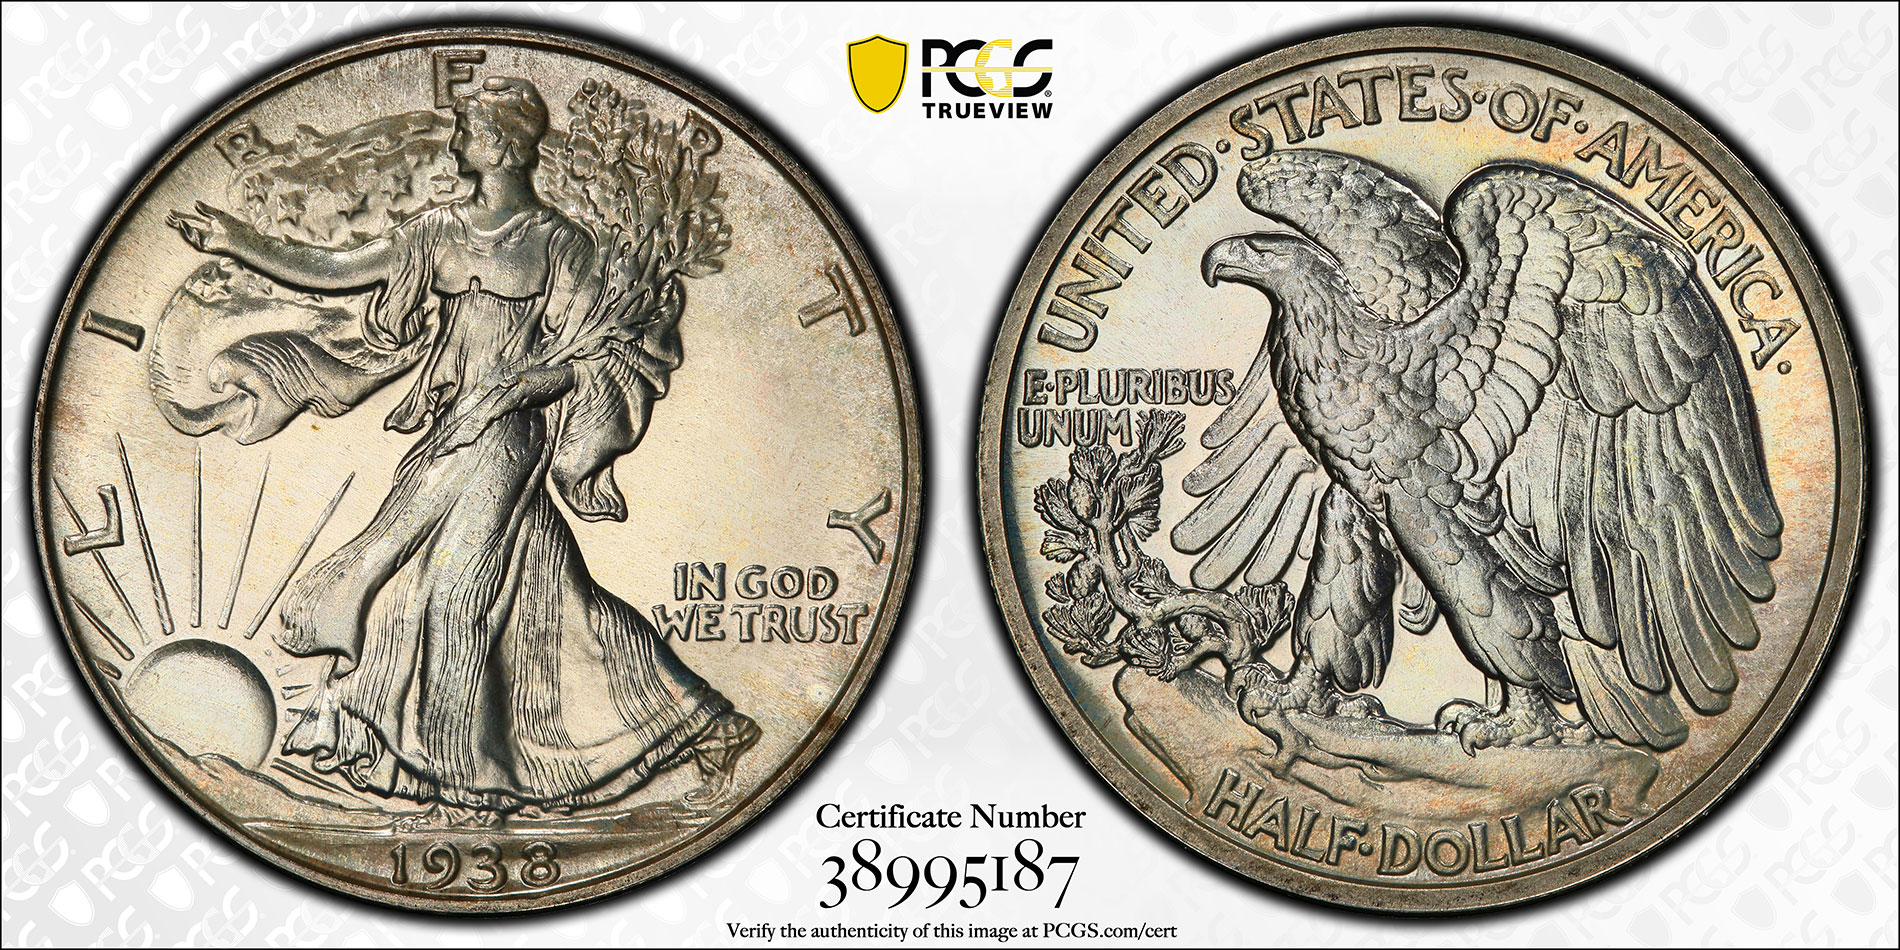 PCGS 1938 Half Dollar Proof Sells for Record $81,562 at GreatCollections